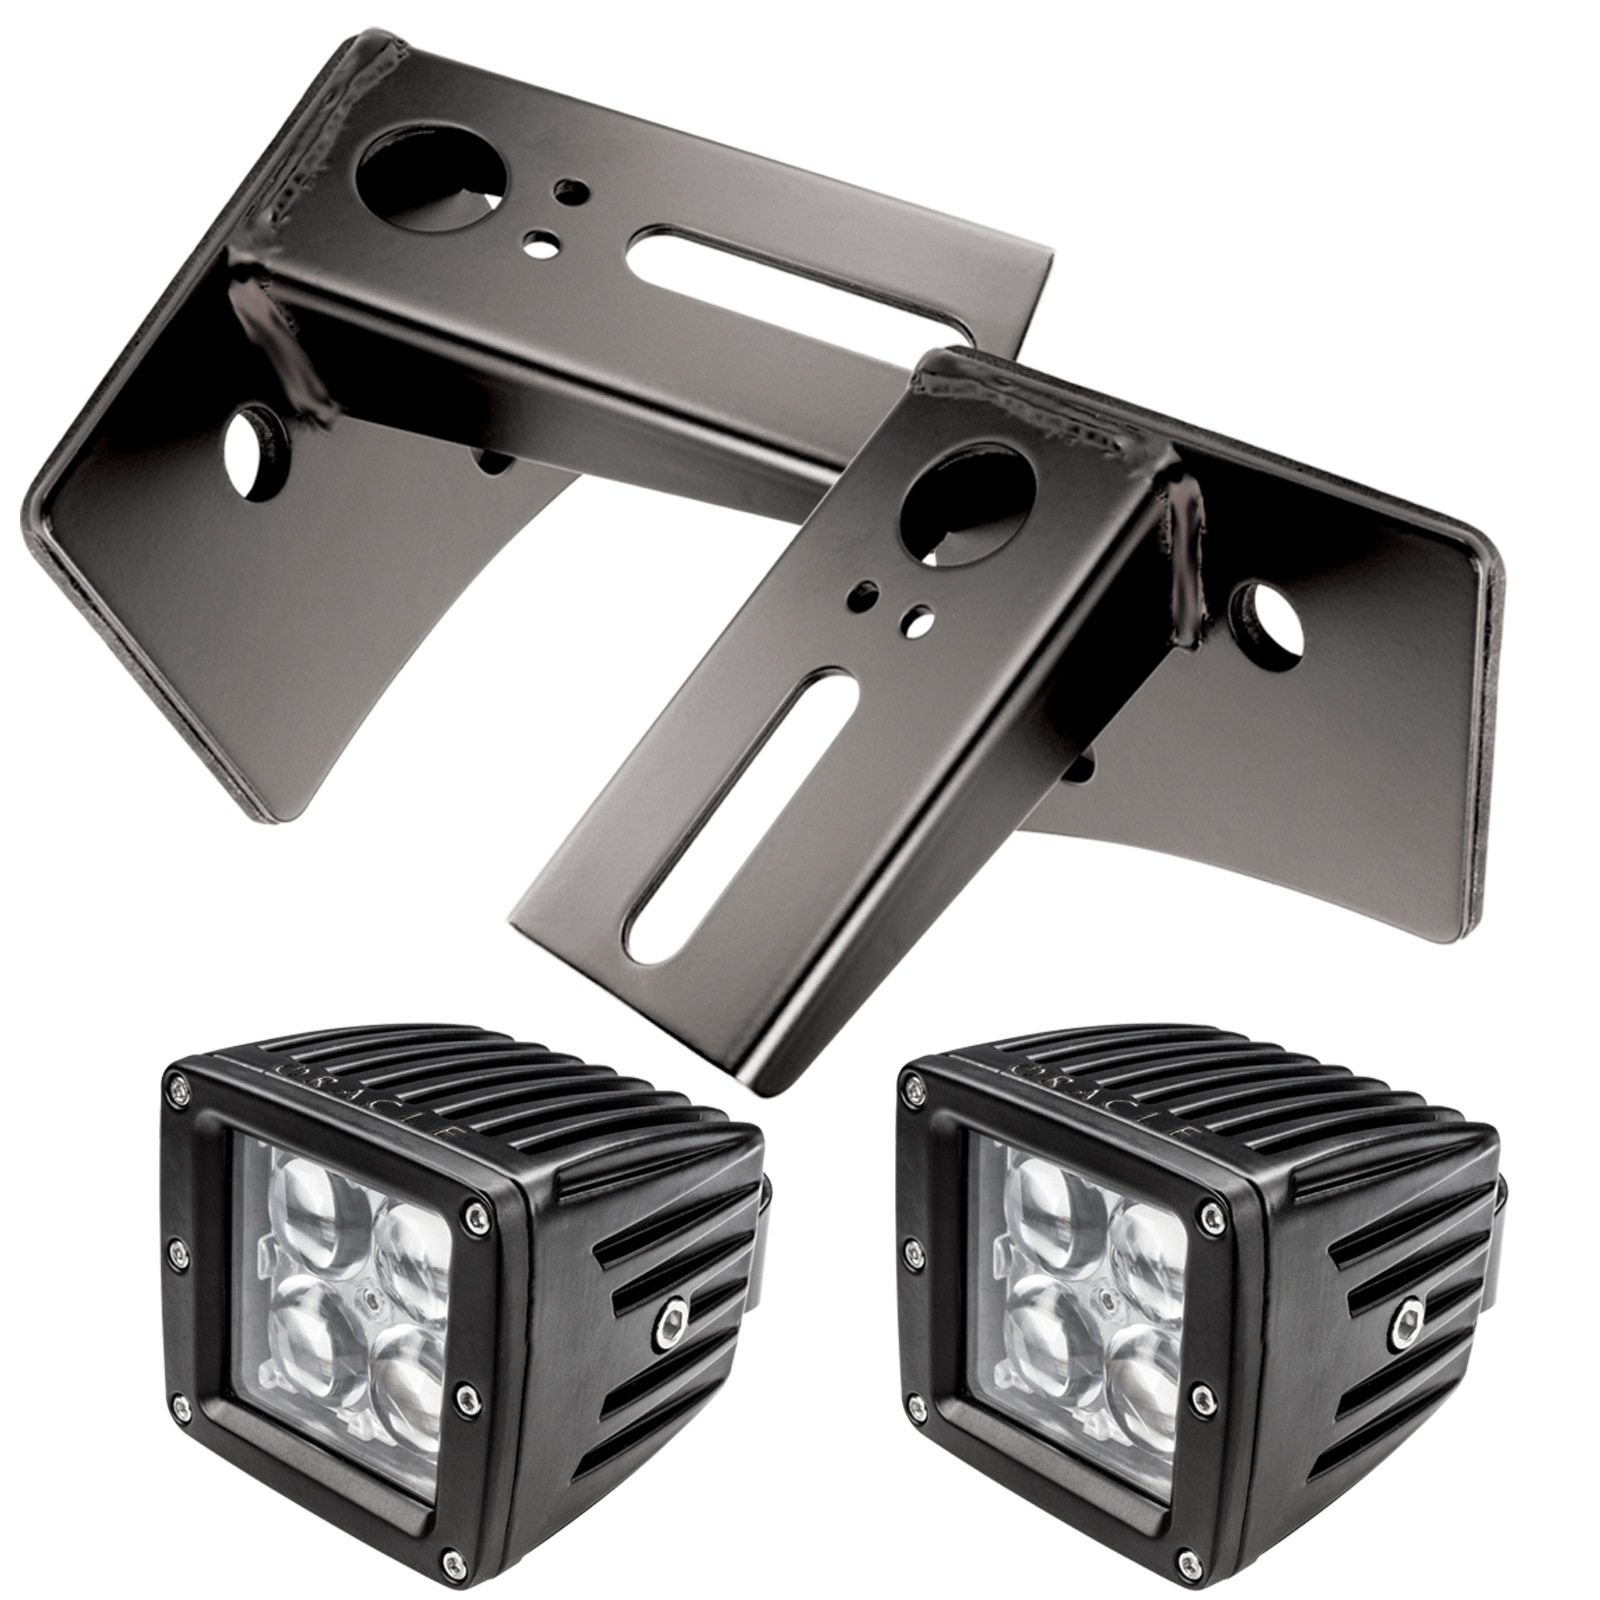 Show details for Oracle Lighting 2142504 Lower Windshield Mount Brackets W/ Lights Combo